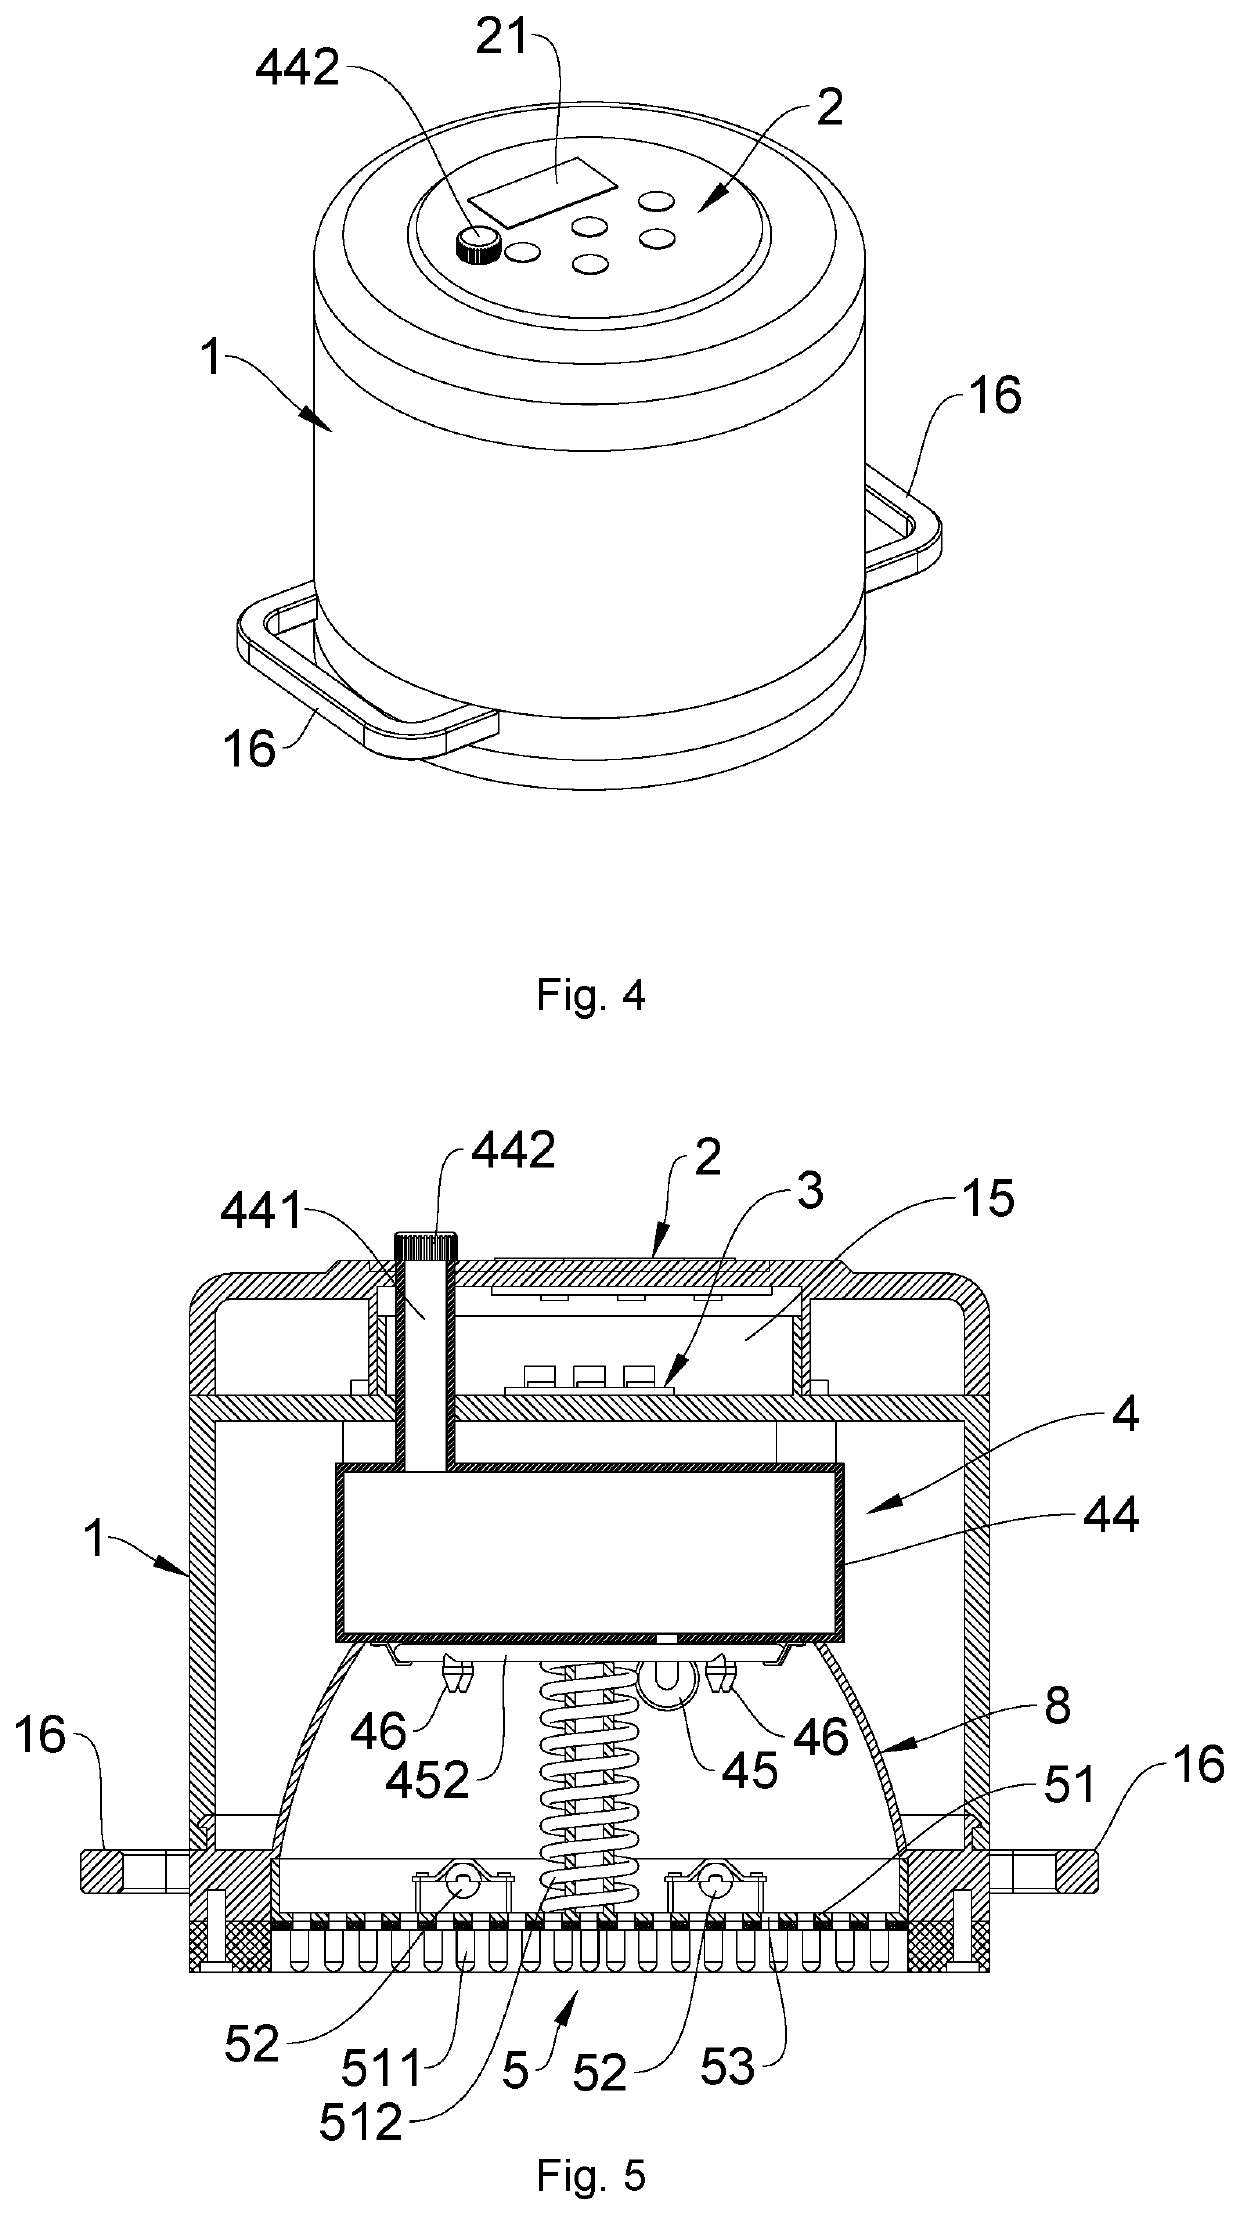 Ultrasonic medicine application device that strongly promotes medicine absorption